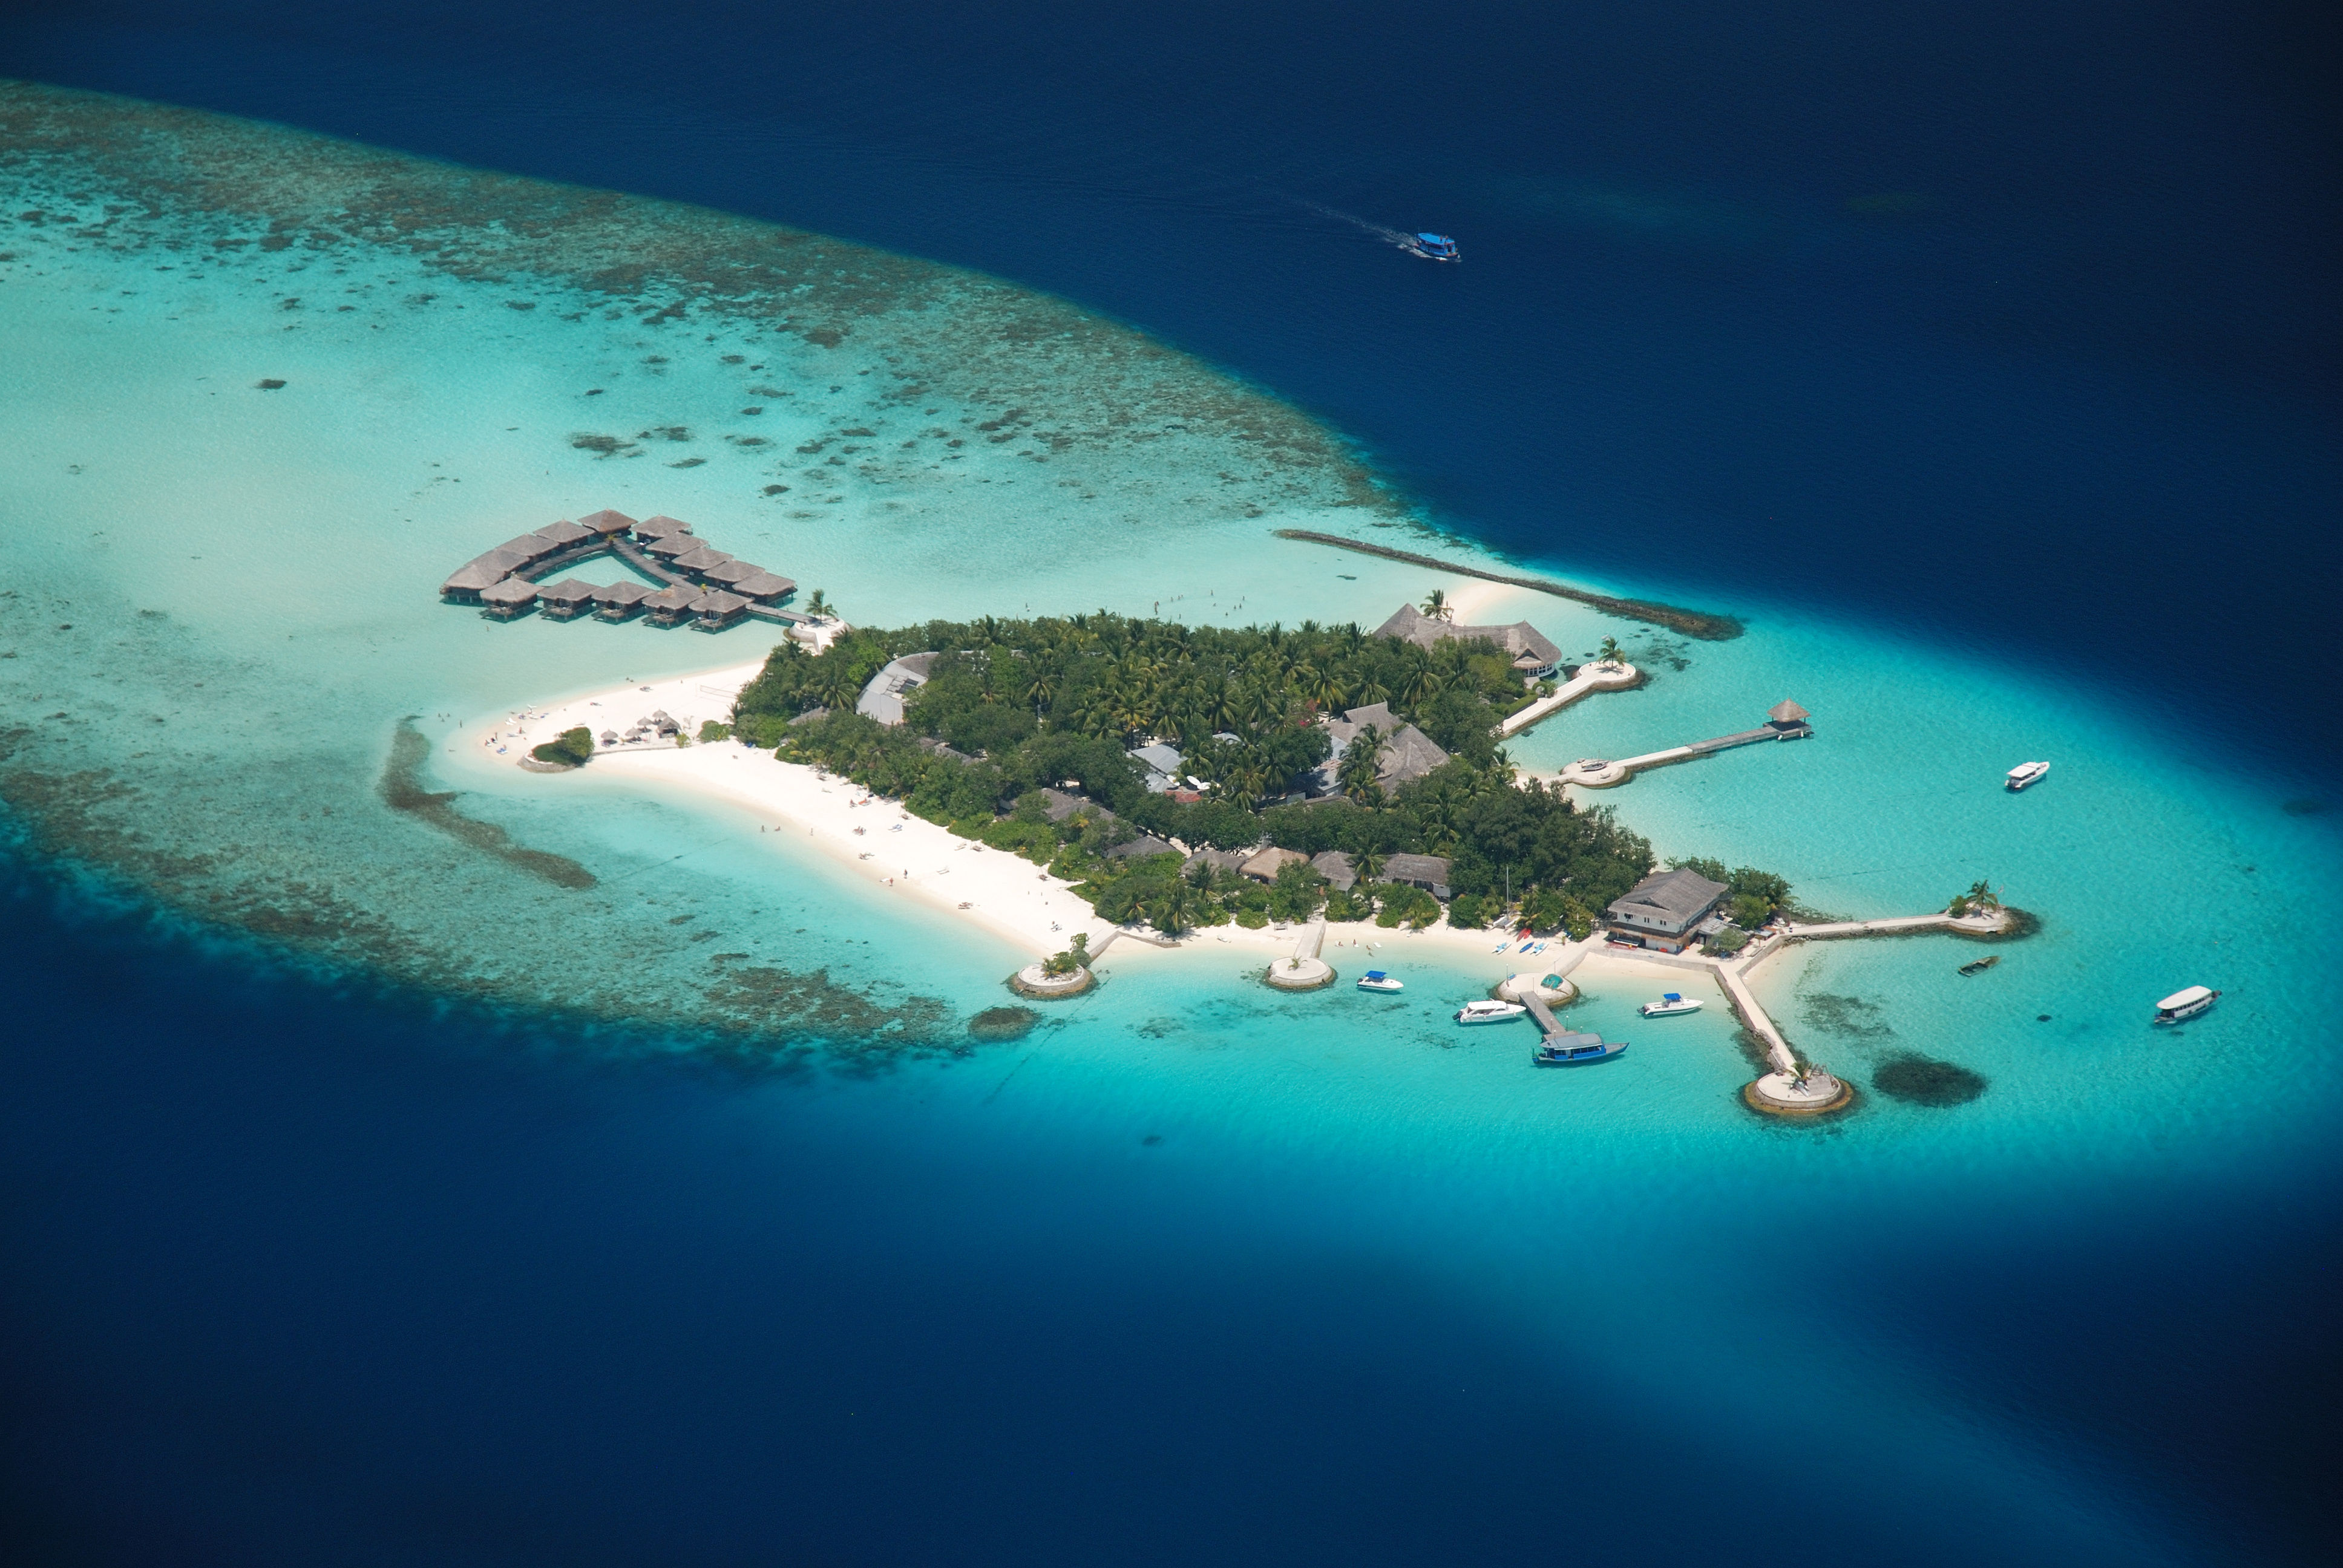 Aerial view of remote island in Maldives, with resort bungalows, turquoise waters and white sand beaches. 